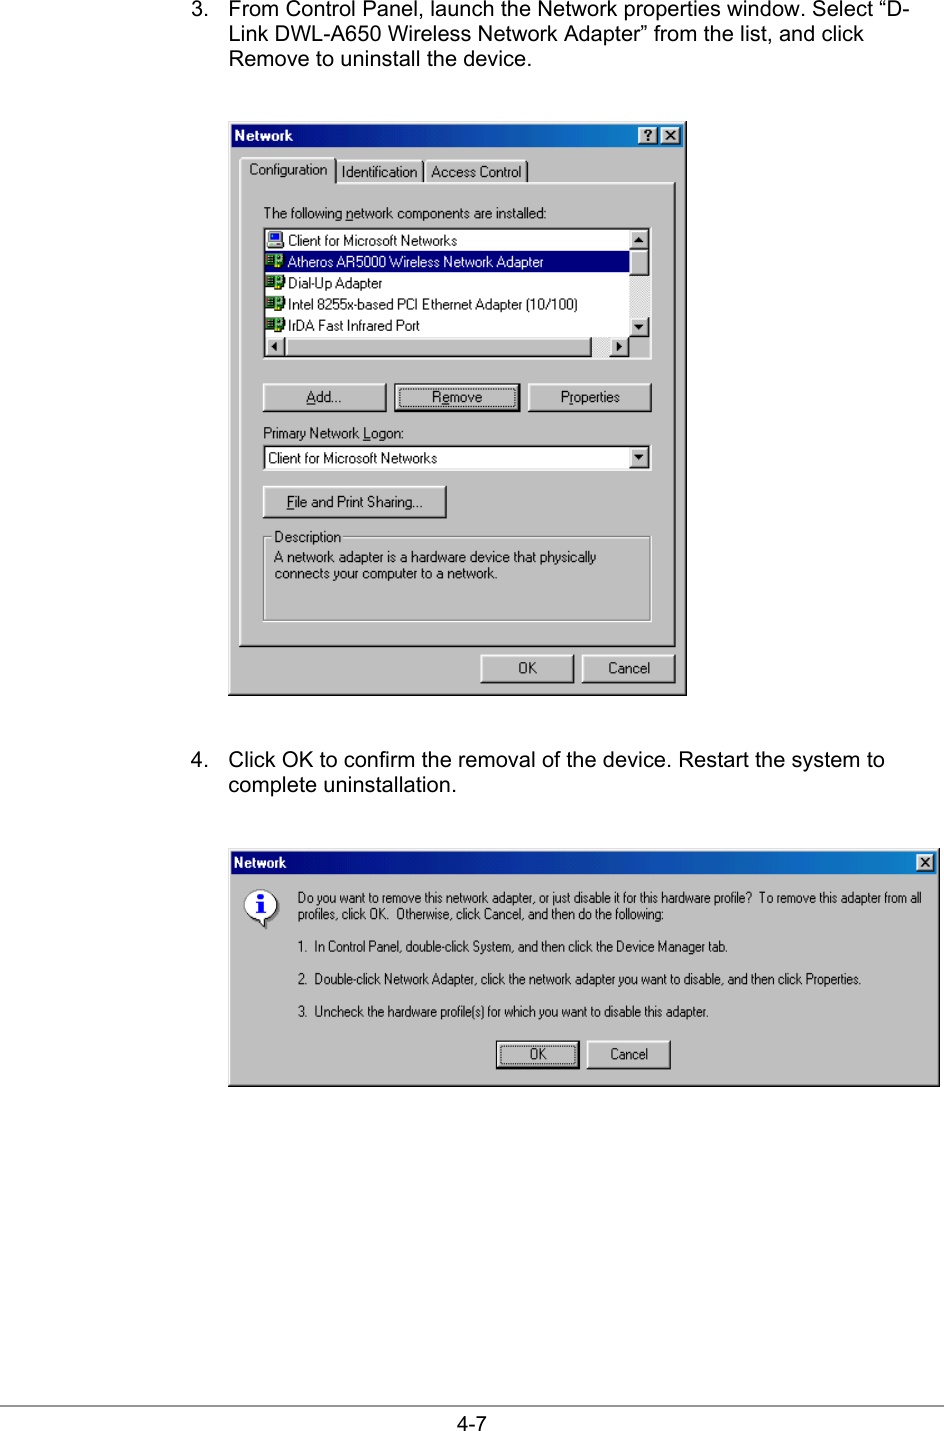  4-7 3.  From Control Panel, launch the Network properties window. Select “D-Link DWL-A650 Wireless Network Adapter” from the list, and click Remove to uninstall the device.   4.  Click OK to confirm the removal of the device. Restart the system to complete uninstallation.   